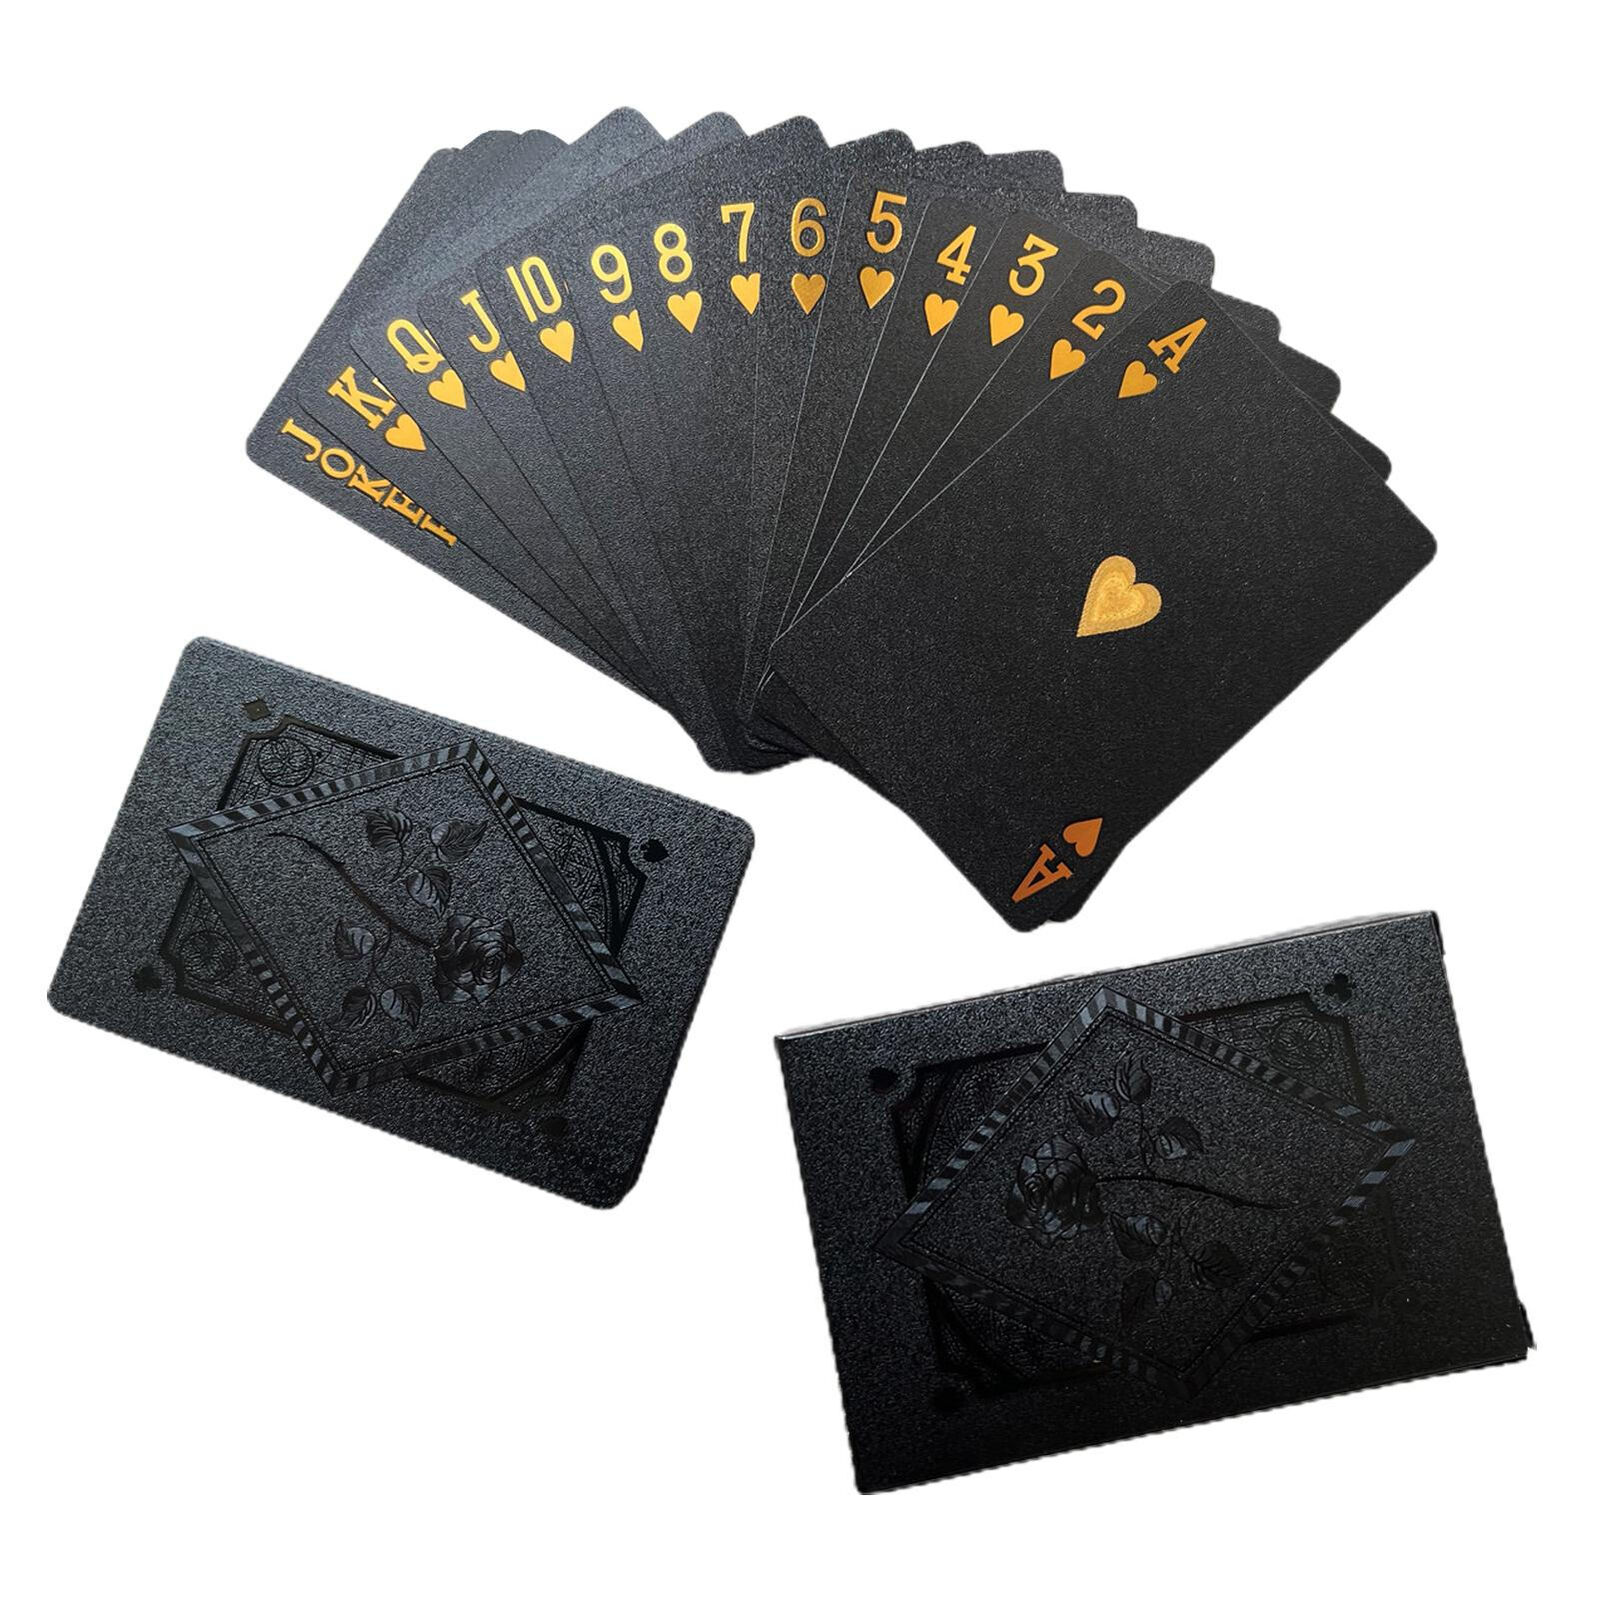 NEW Black Gold And Silver Foil Waterproof Plastic Playing Poker Deck Game Cards